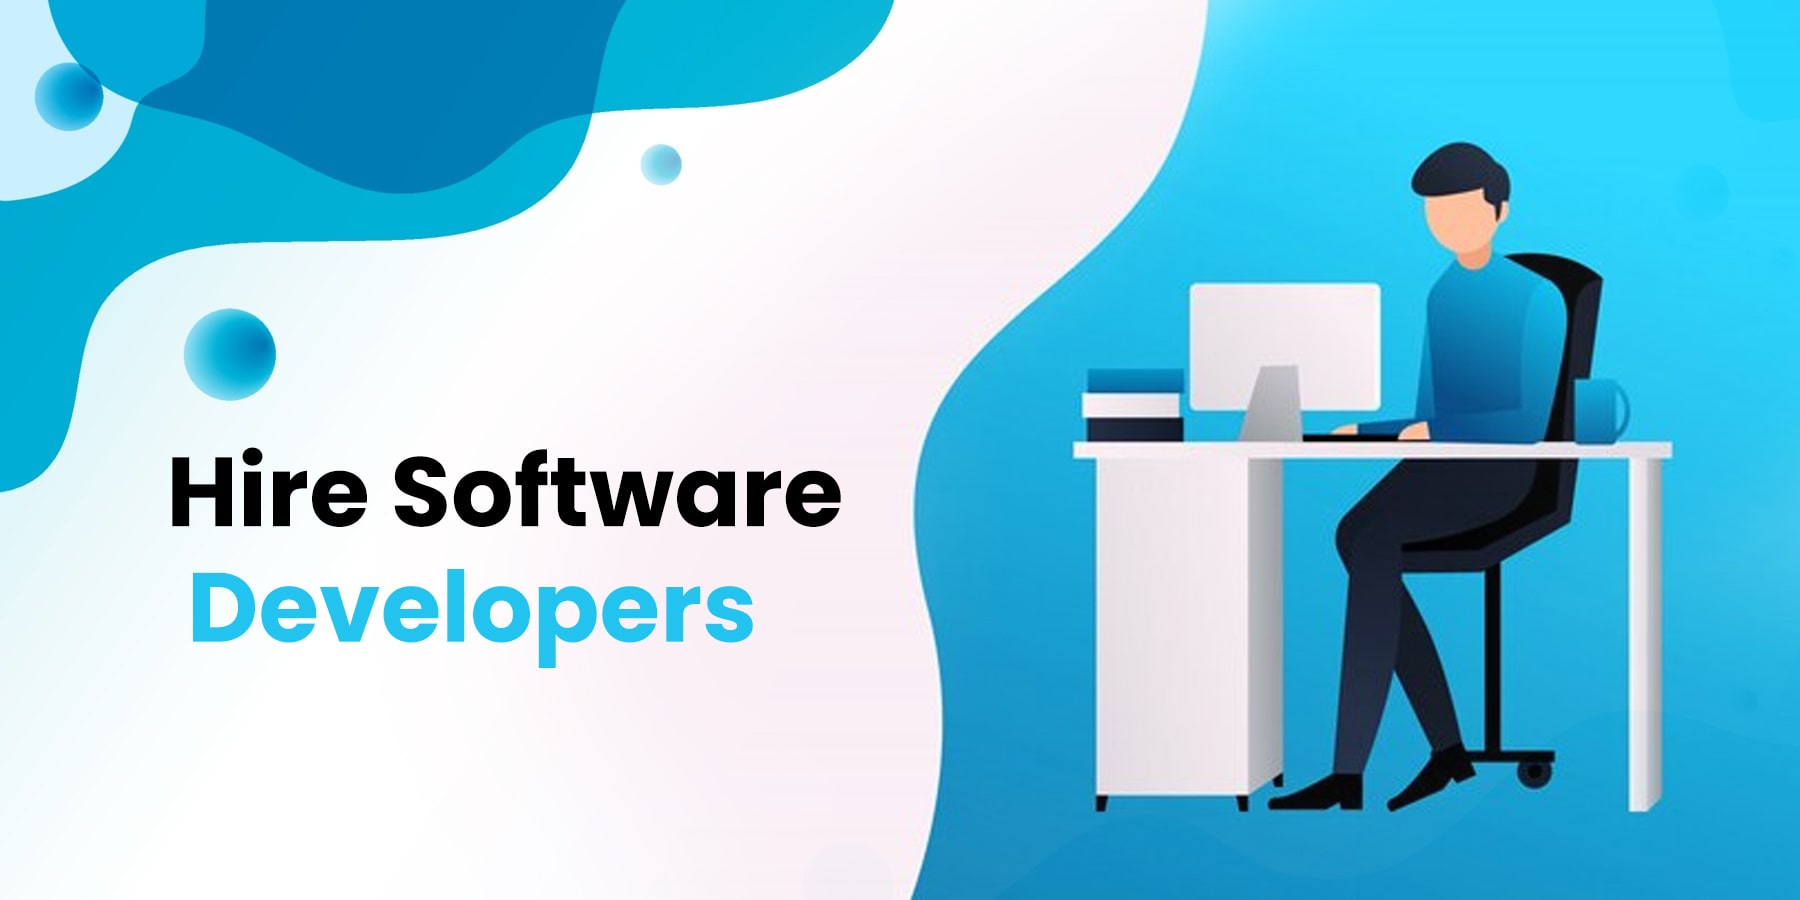 Hire Software Developers | 4 Types of Interview Questions to Ask